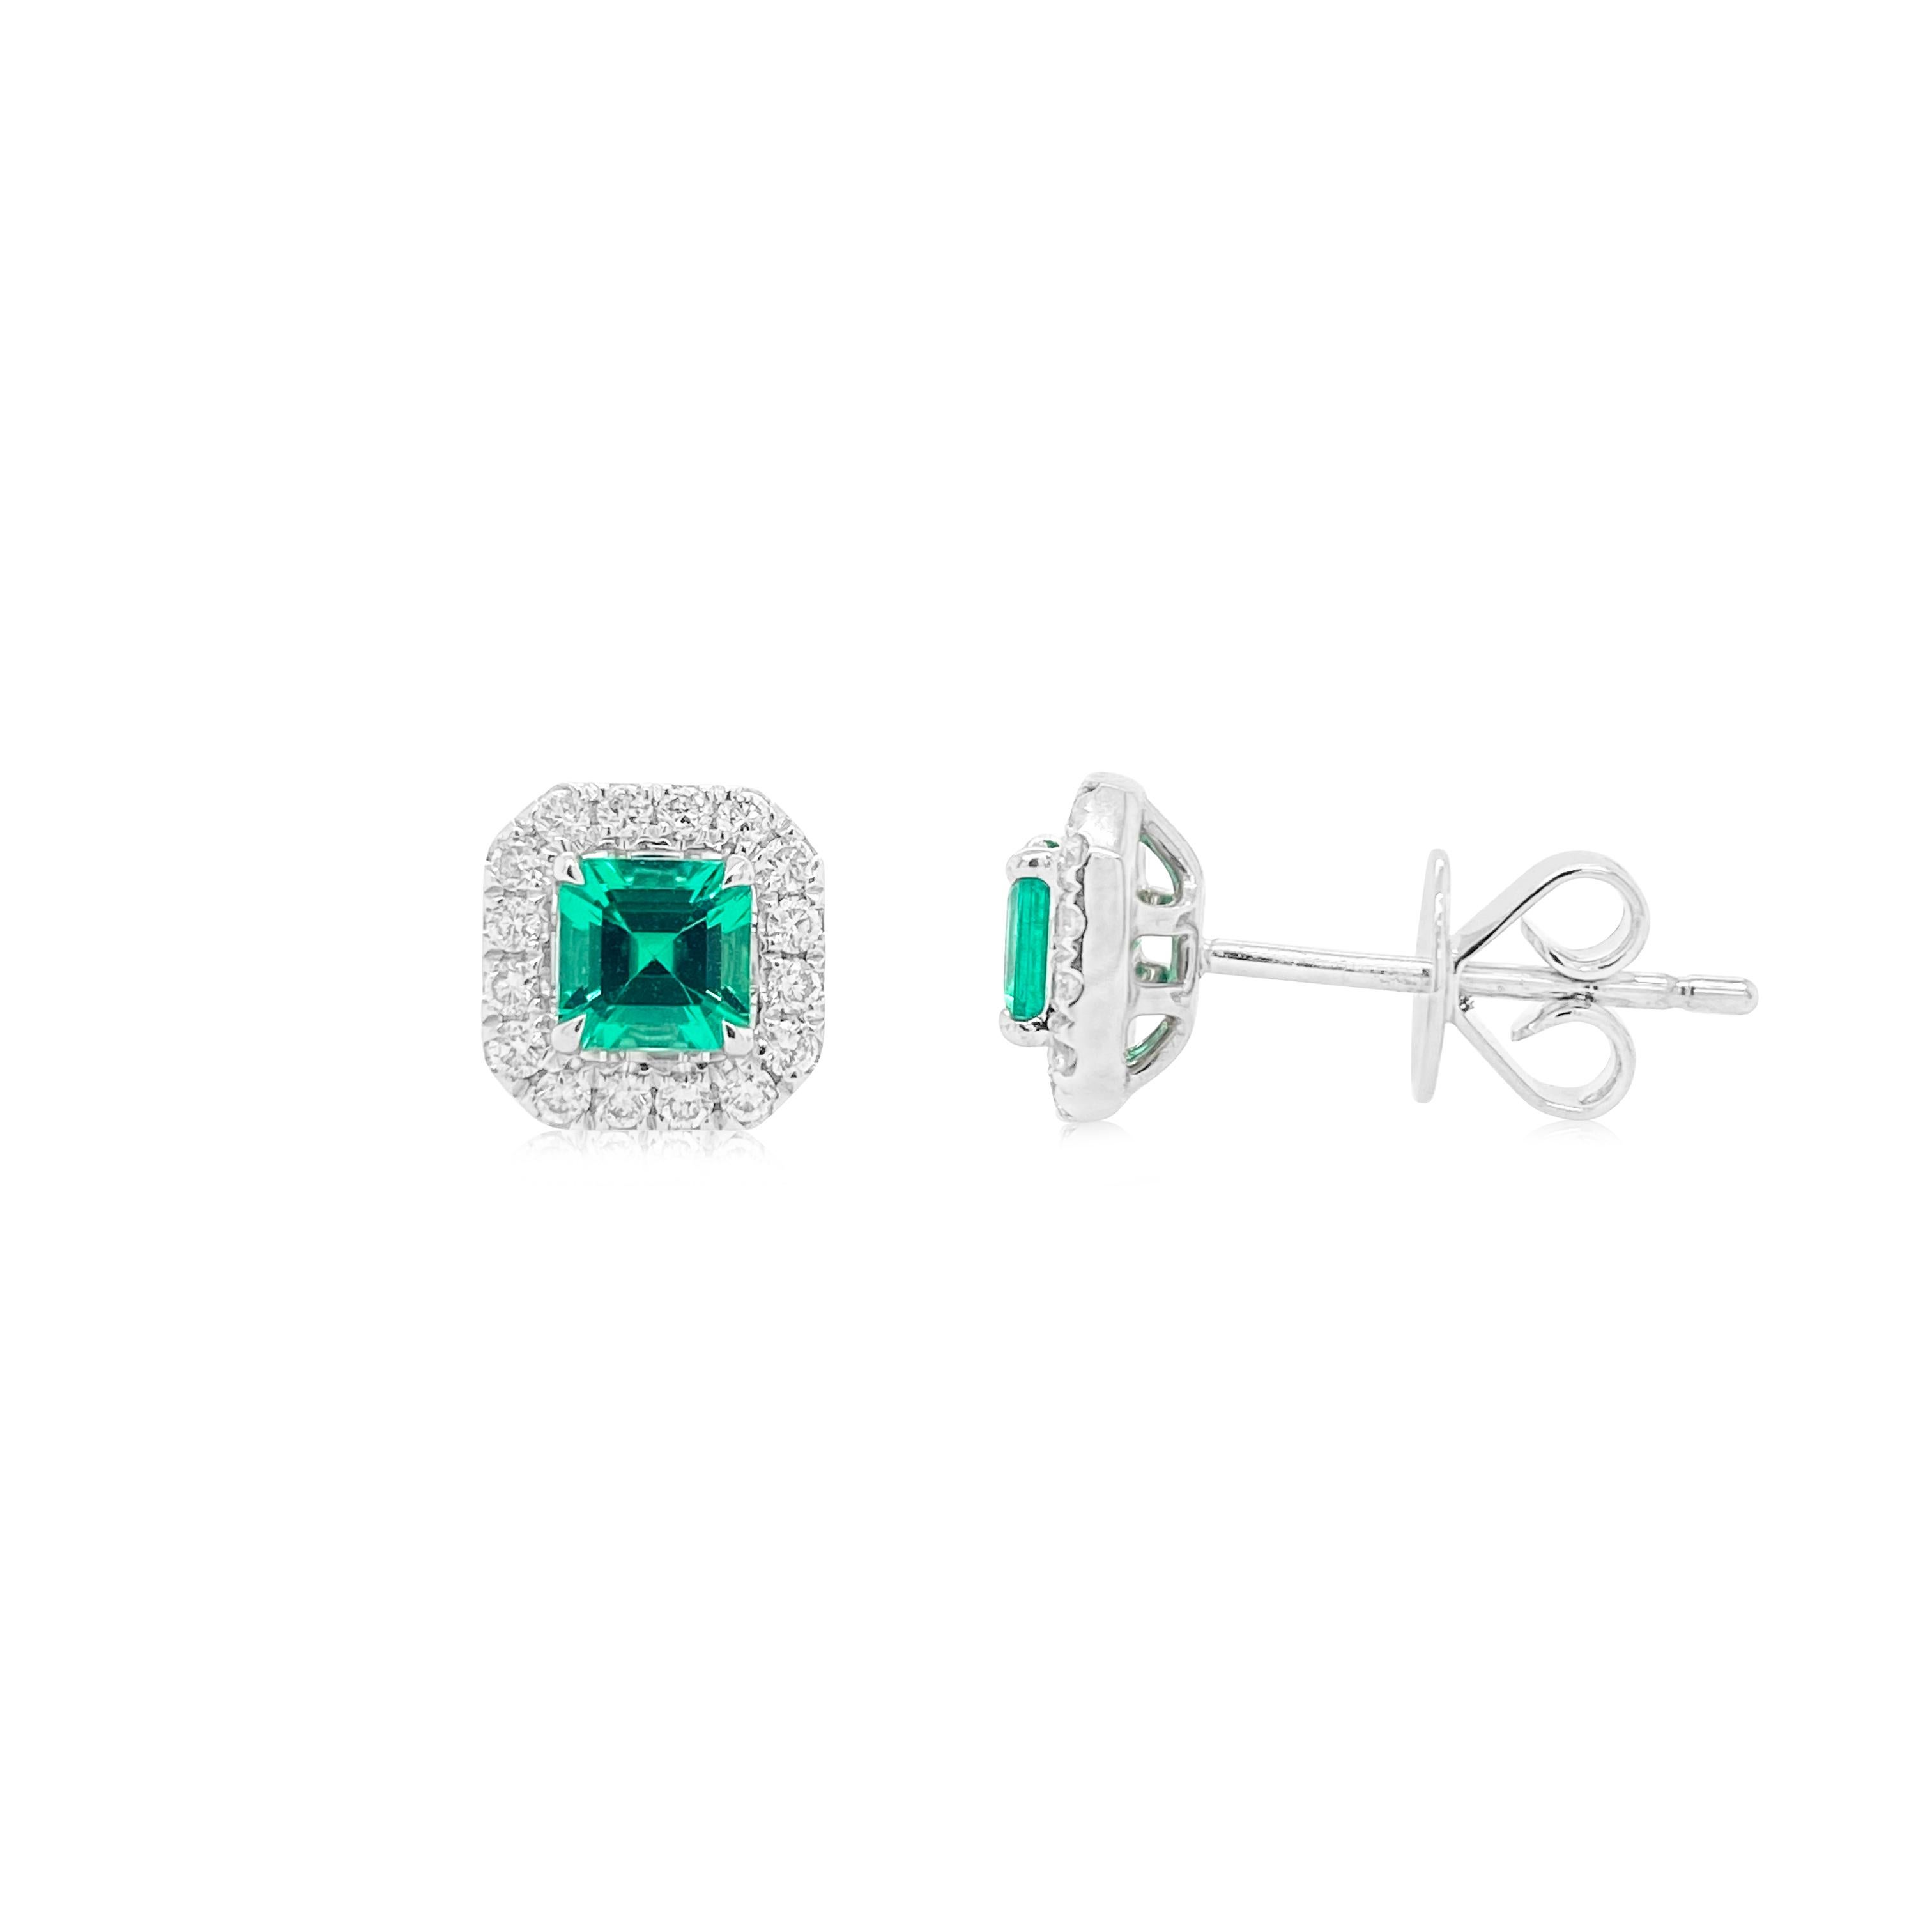 These beautiful one-of-a-kind Colombian Emerald Earrings are a rare set, the emeralds are lab-certified and come with a rare cut and luster.

- Emerald- 0.60 CT
- White diamond - 0.24 ct                                                               